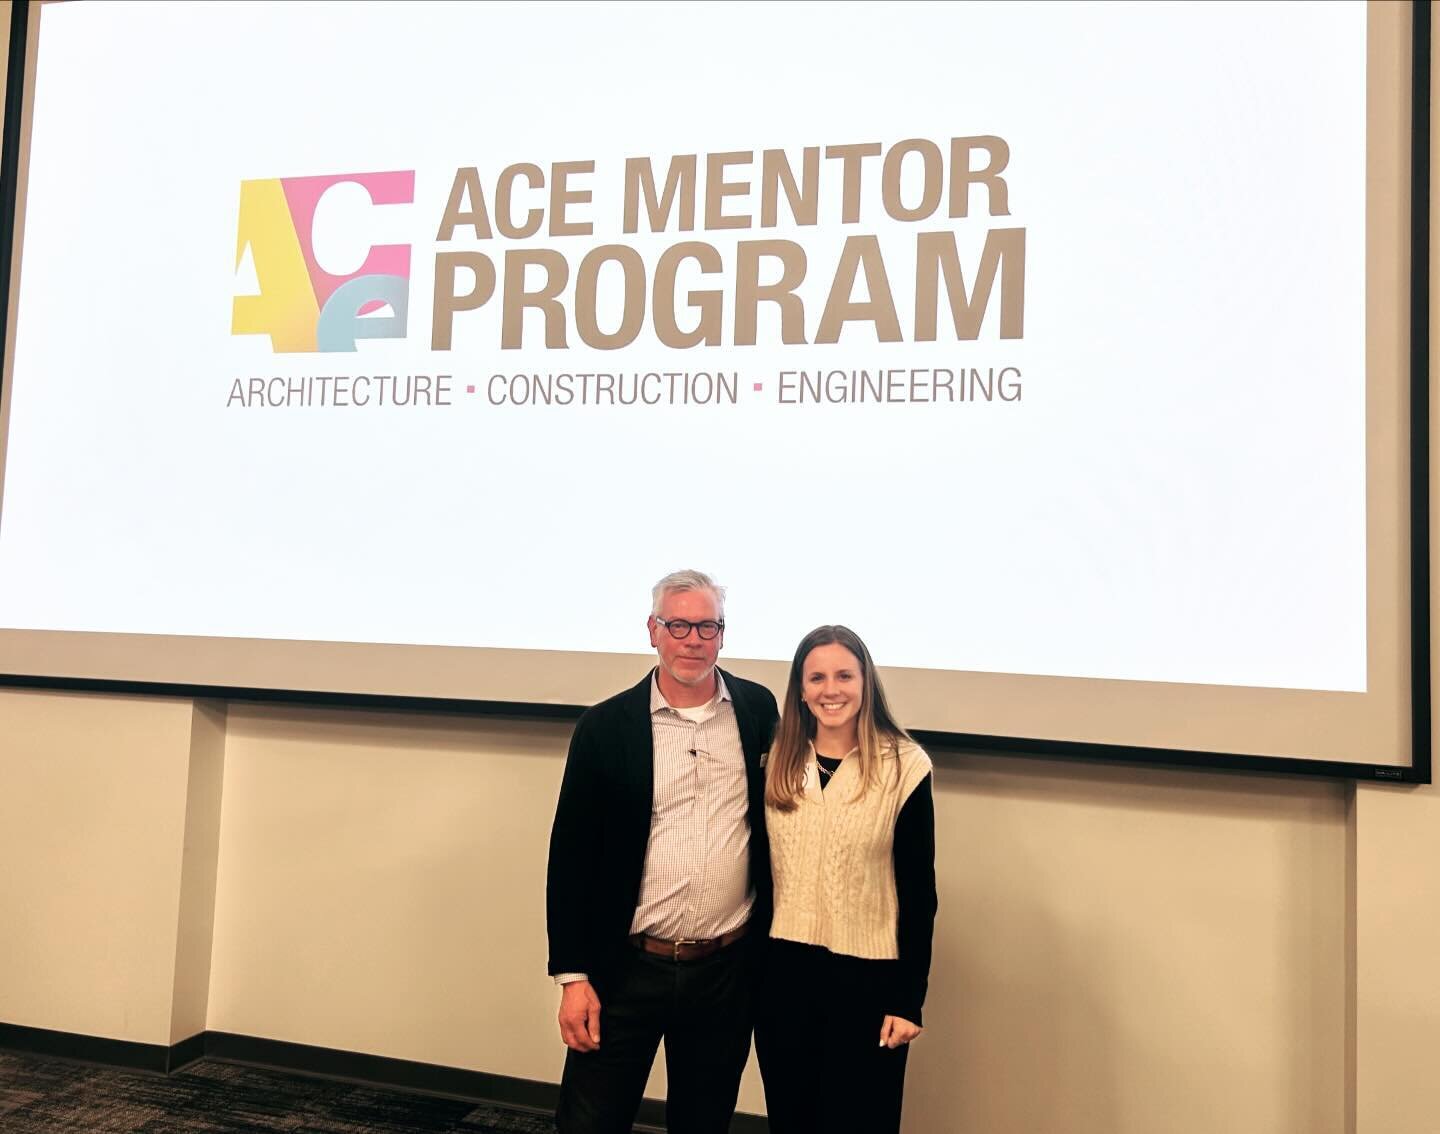 The Chattanooga affiliate of the ACE Mentor Program recently held their annual awards banquet featuring student presentations on a mixed-use project. The program introduces high school students to the wide range of career opportunities in architectur